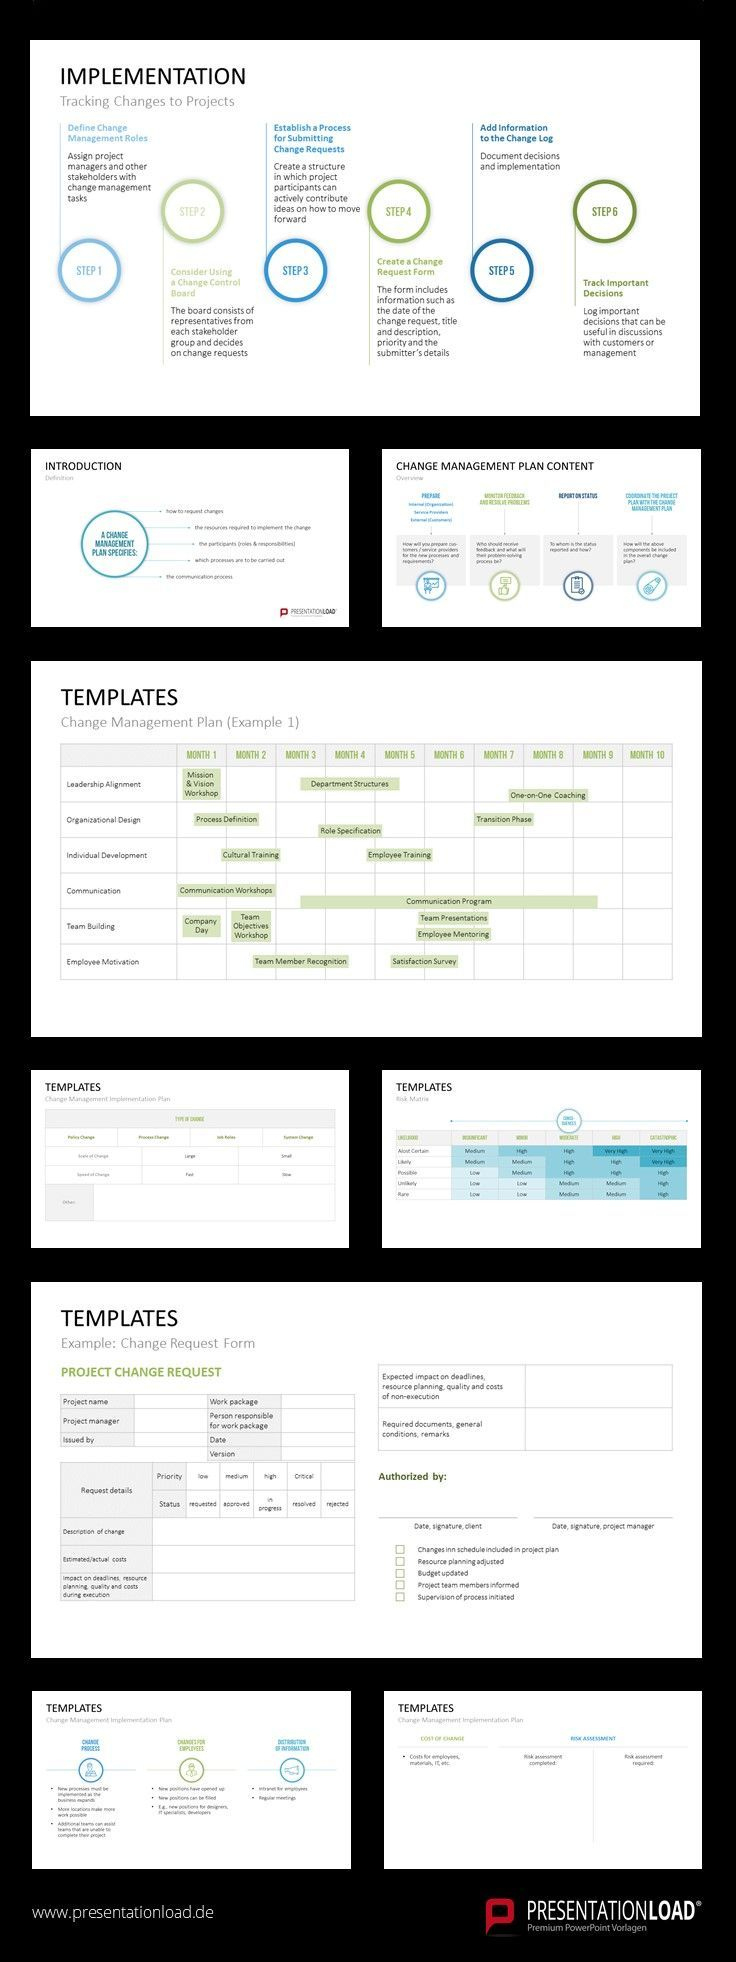 Free Communication Plan For Change Management Template